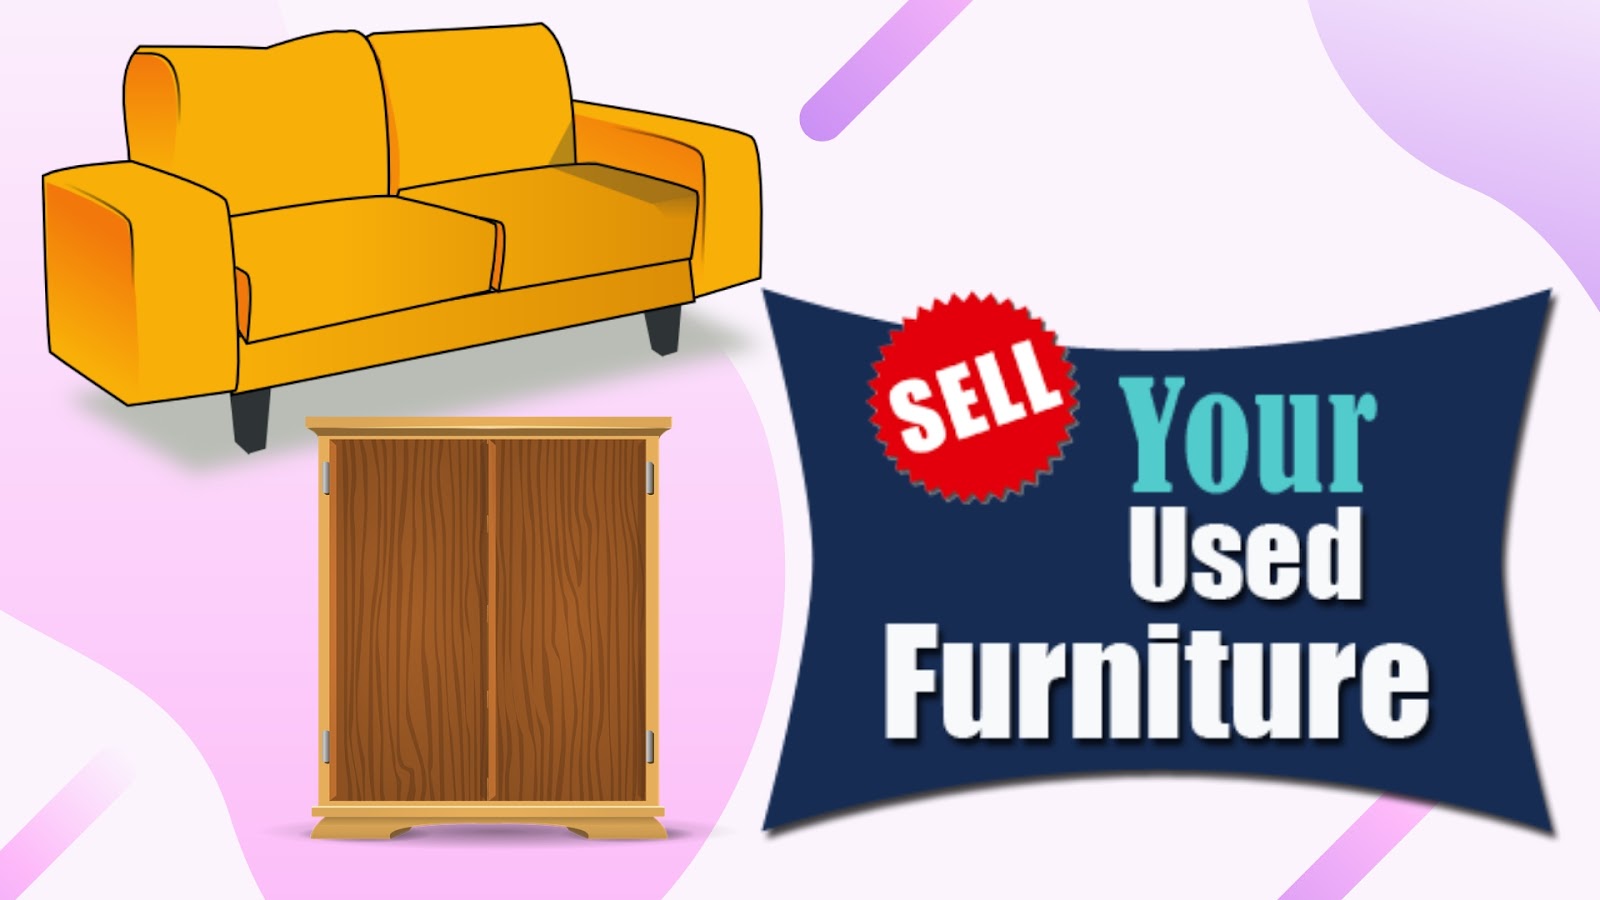 How Can You Sell Used Furniture Online In A Hassle Free Way